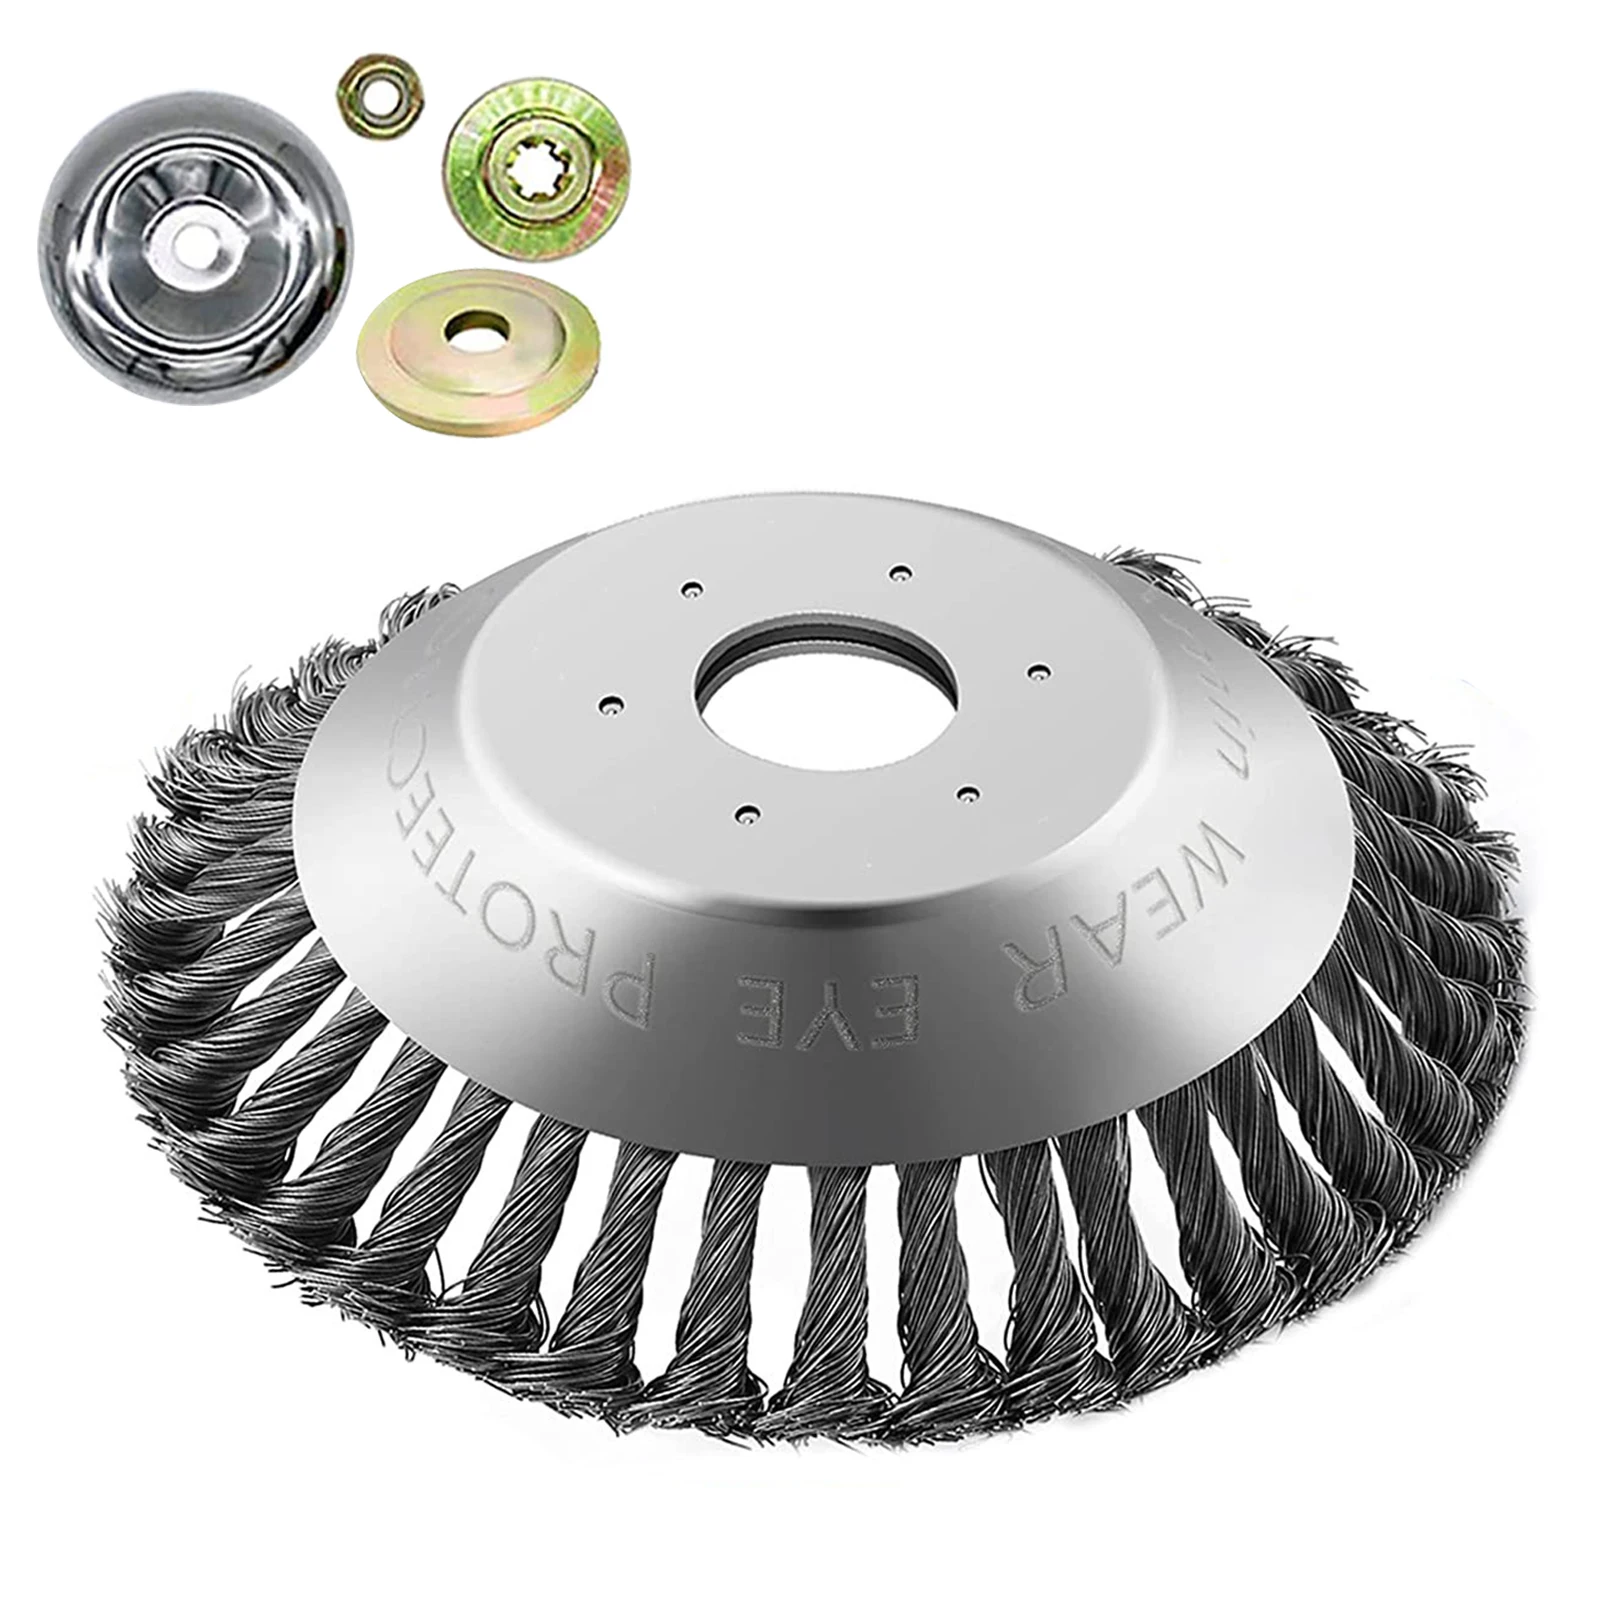 

Accessories Wheel Gardening Lawn Rotary Trimmer Head 4 Adapters Removal Power Tool Weed Brush Effective Heavy Duty Steel Wire